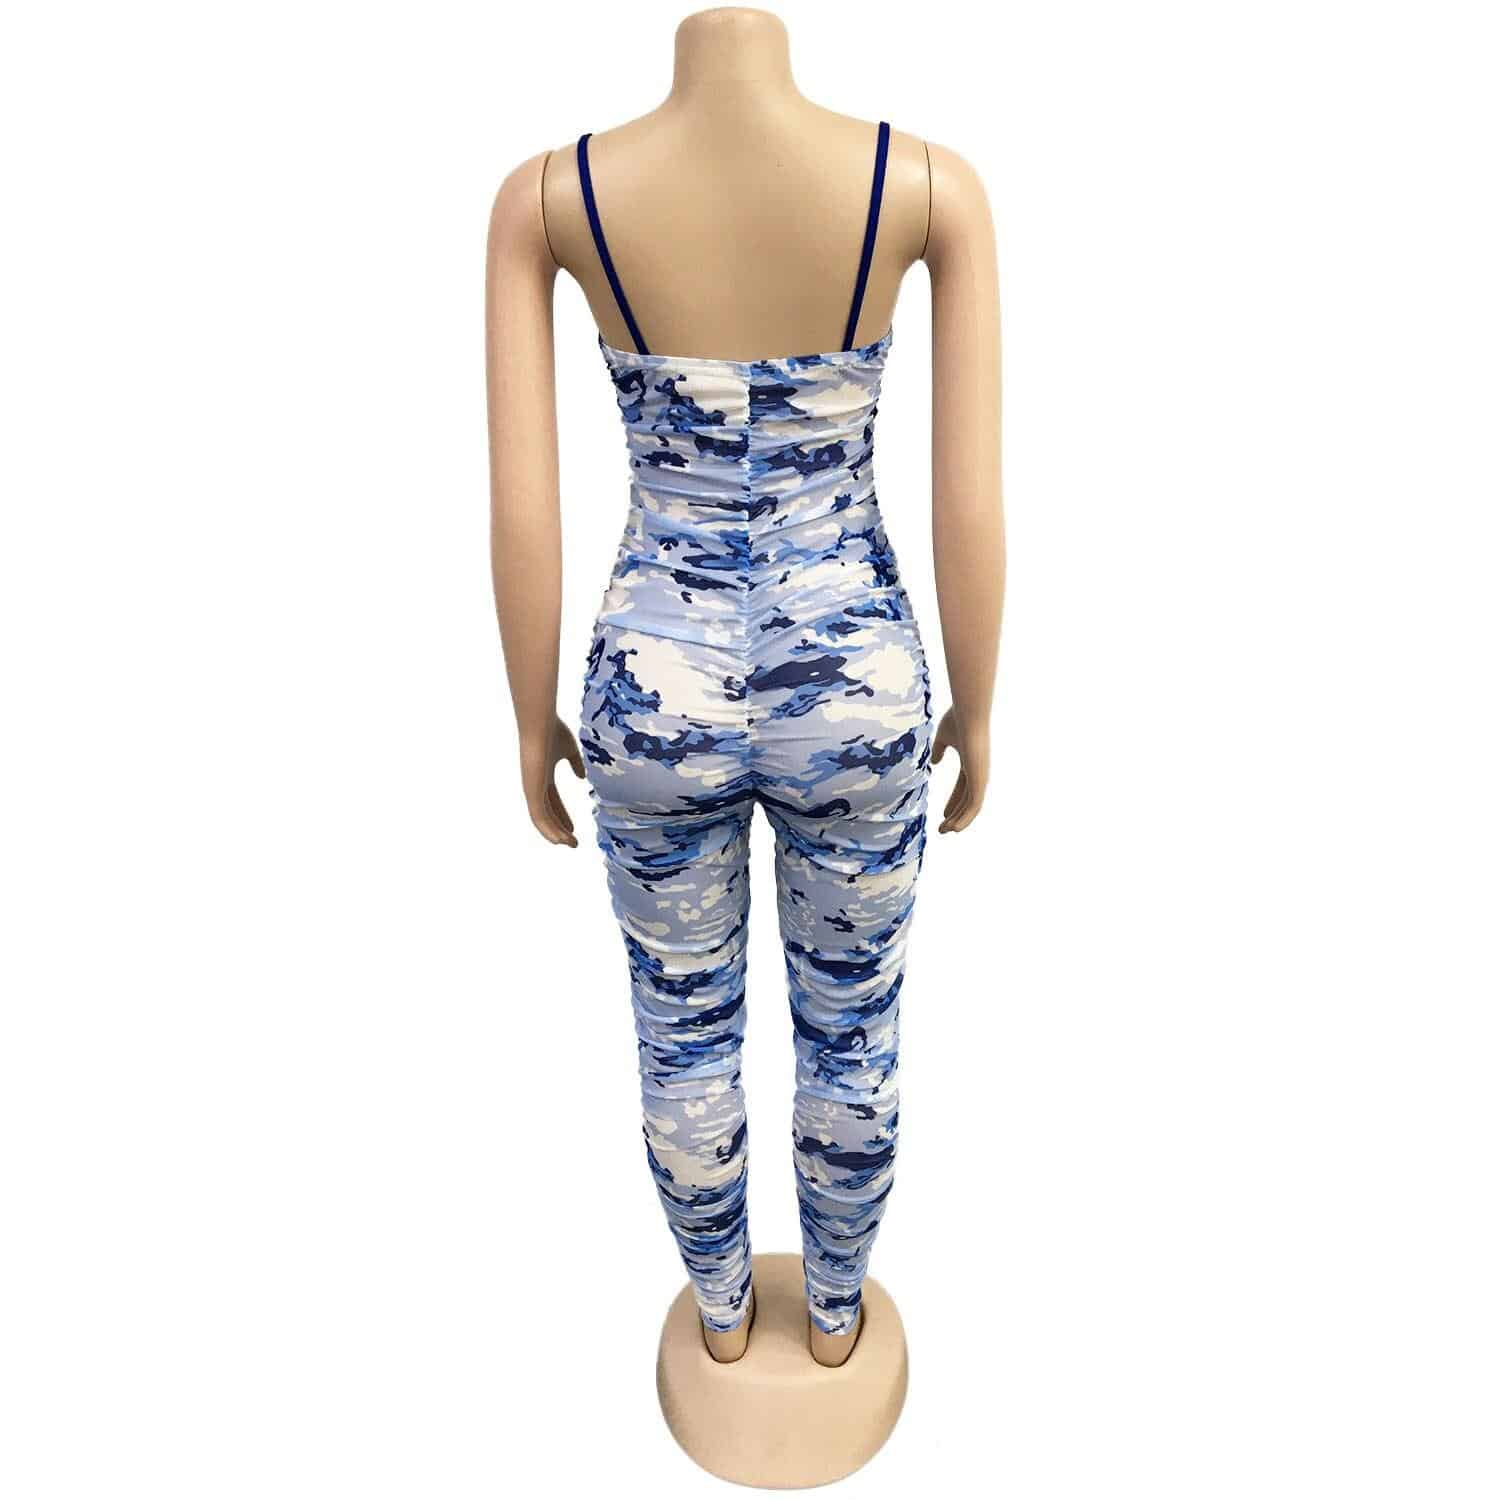 Zoctuo Camouflage Jumpsuit for Women Streetwear Sleeveless Skinny Casual Jumpsuits for Women Sexy Playsuit 2020 Summer